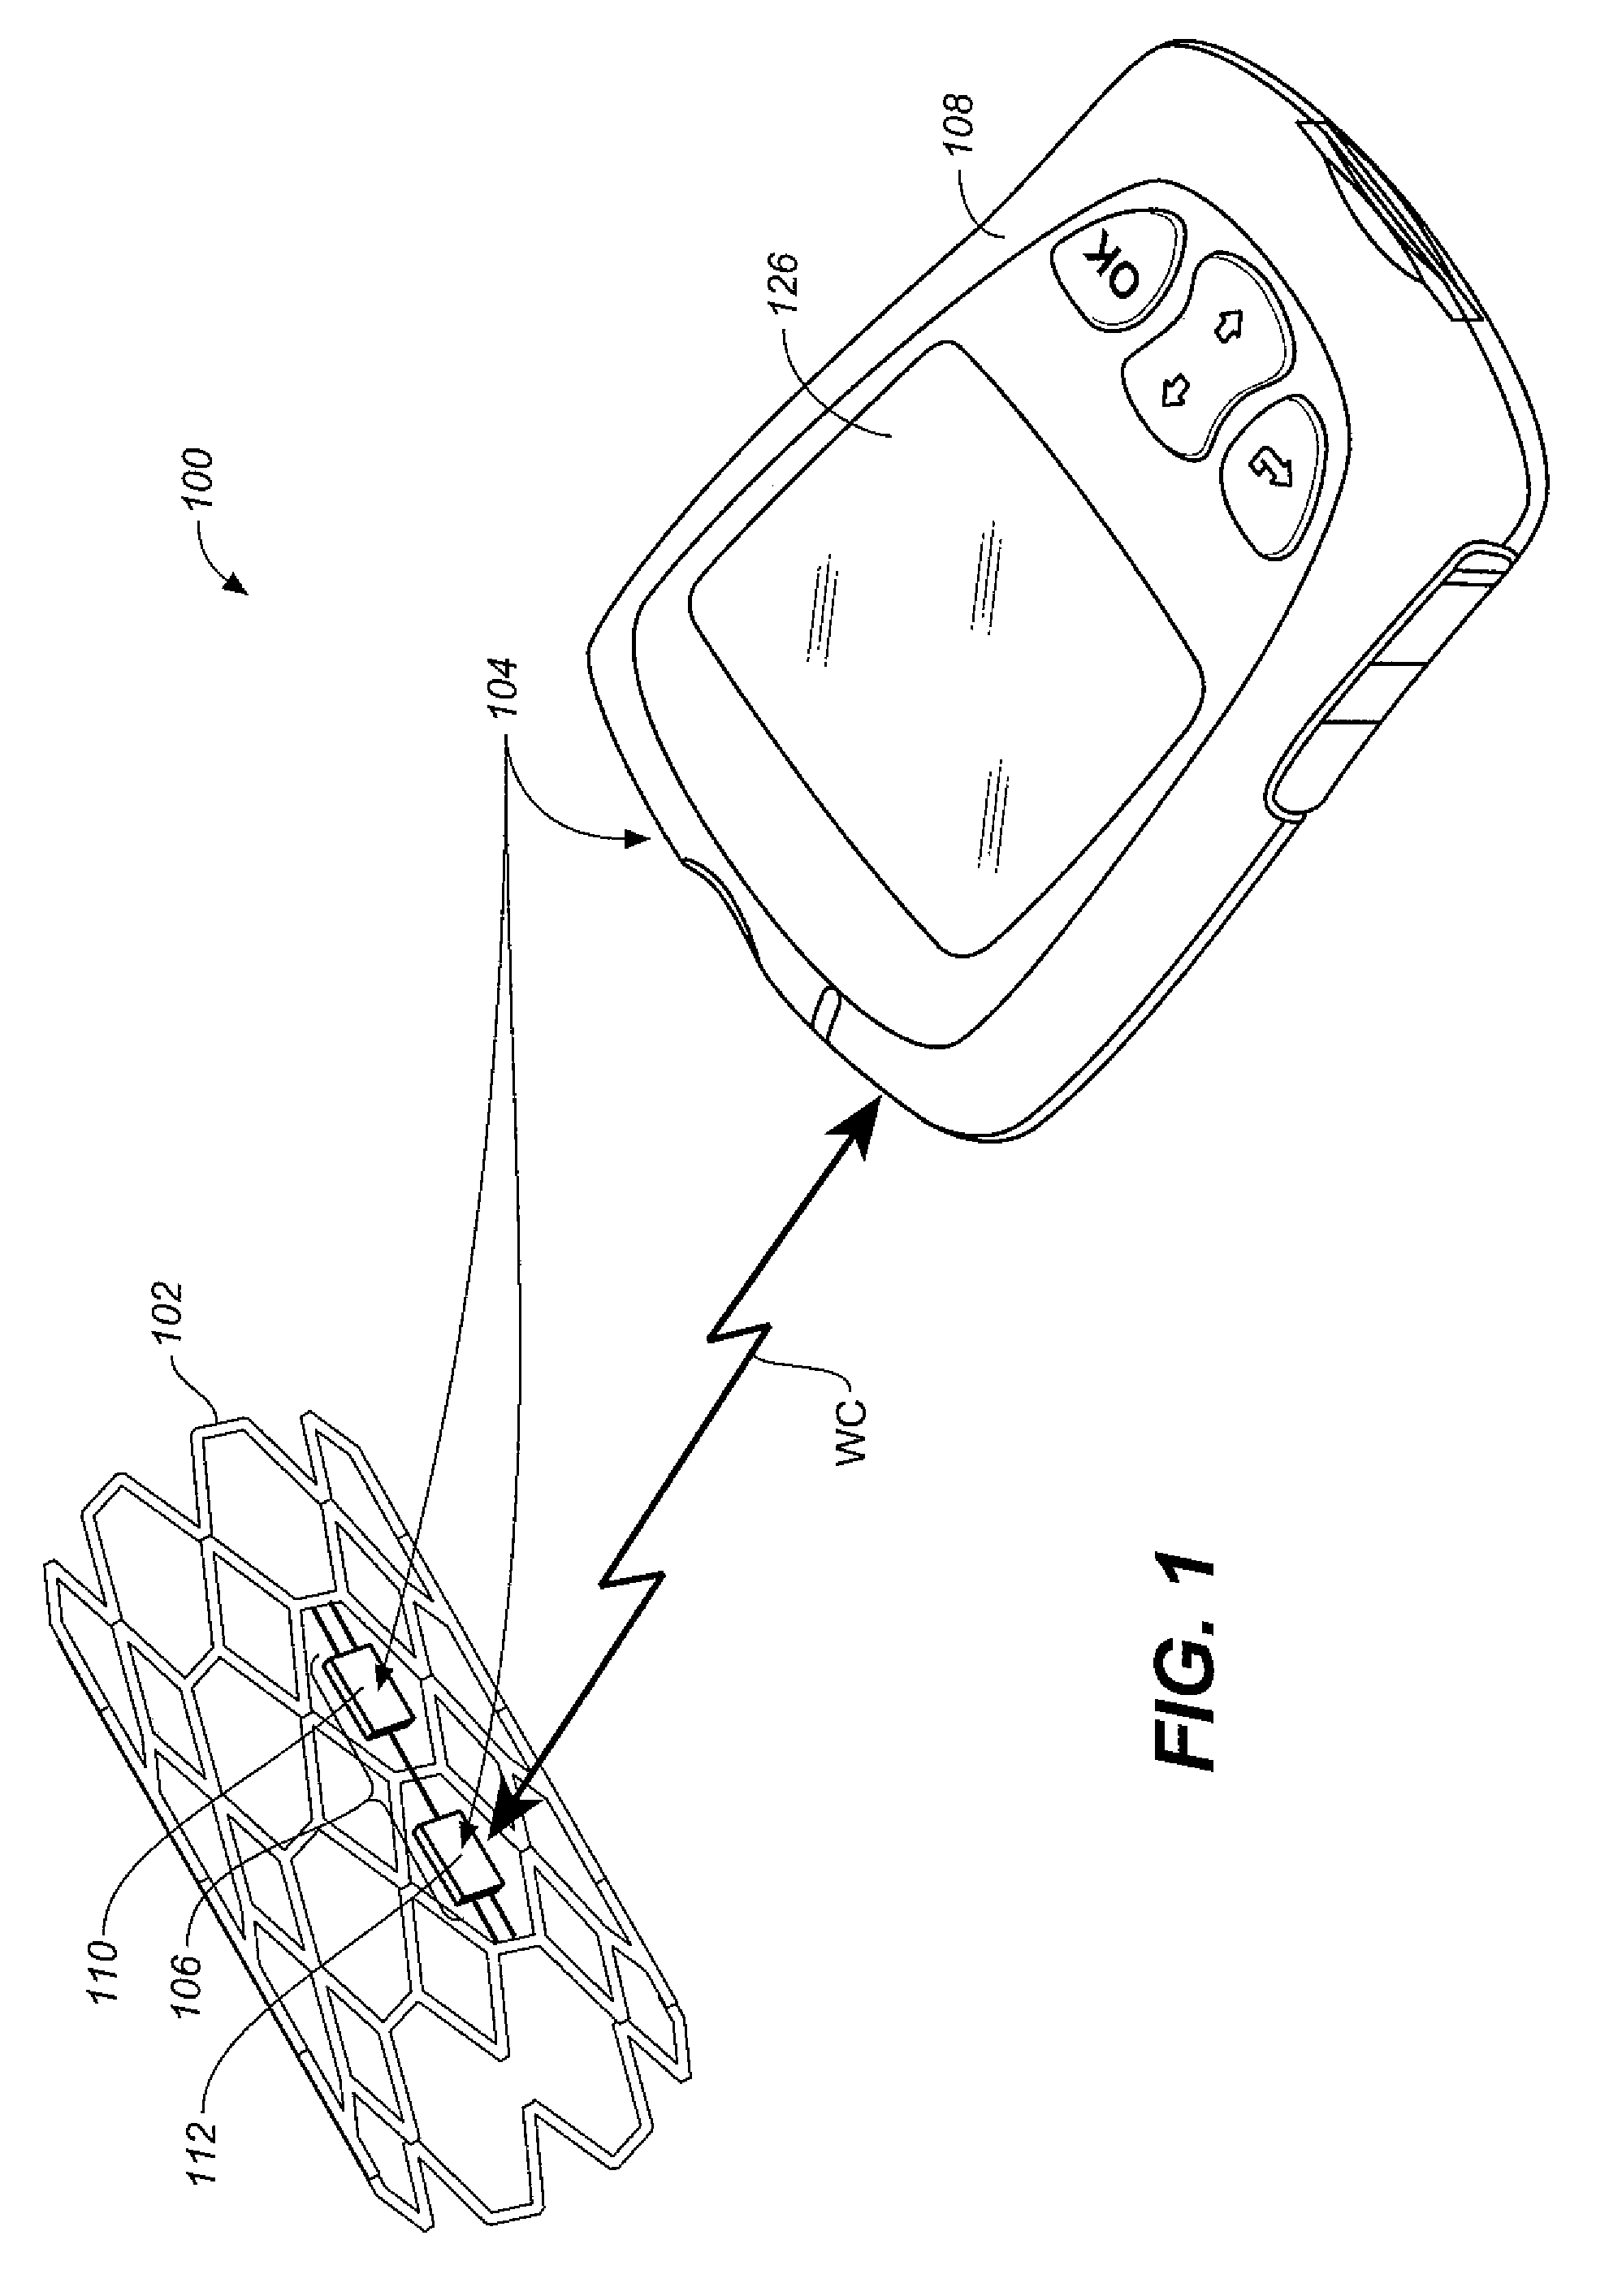 Method for integrating facilitated blood flow and blood analyte monitoring